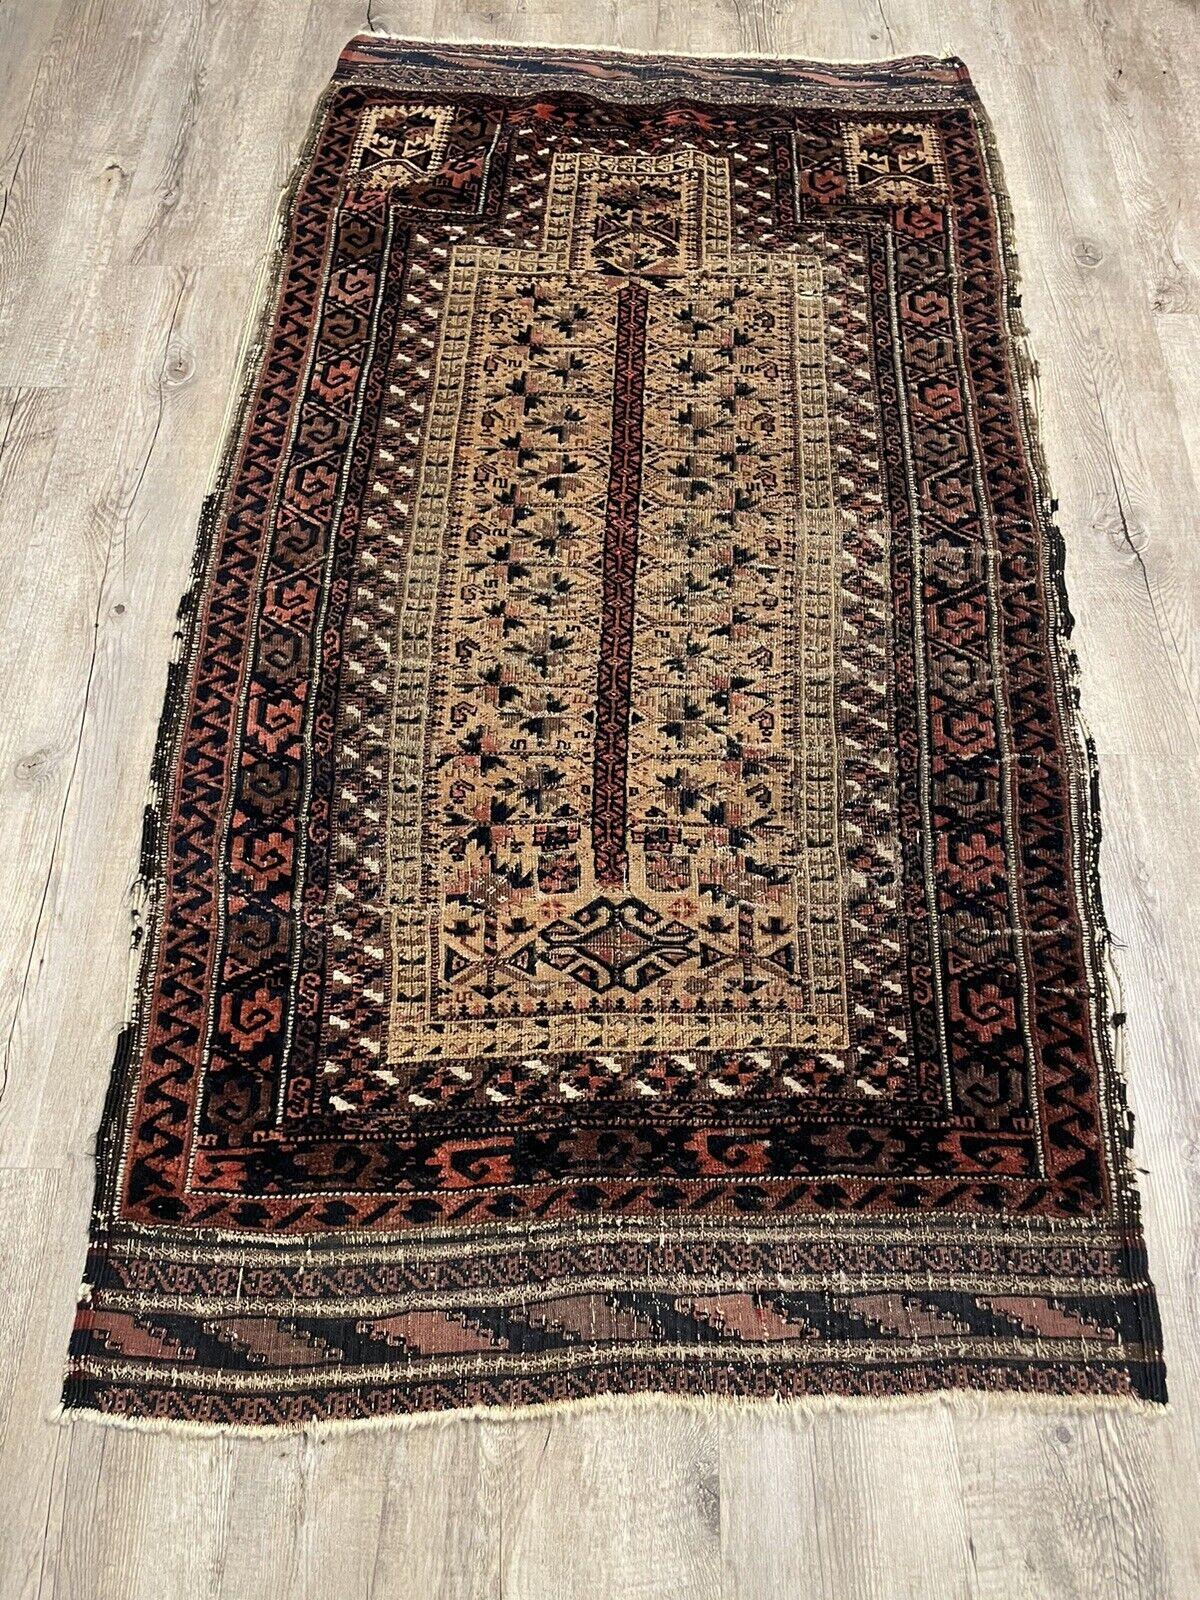 Enhance your space with the timeless charm of this Handmade Antique Afghan Baluch Collectible Rug, dating back to the late 19th century. Crafted with care by skilled artisans in Afghanistan, this exquisite rug showcases the intricate artistry and